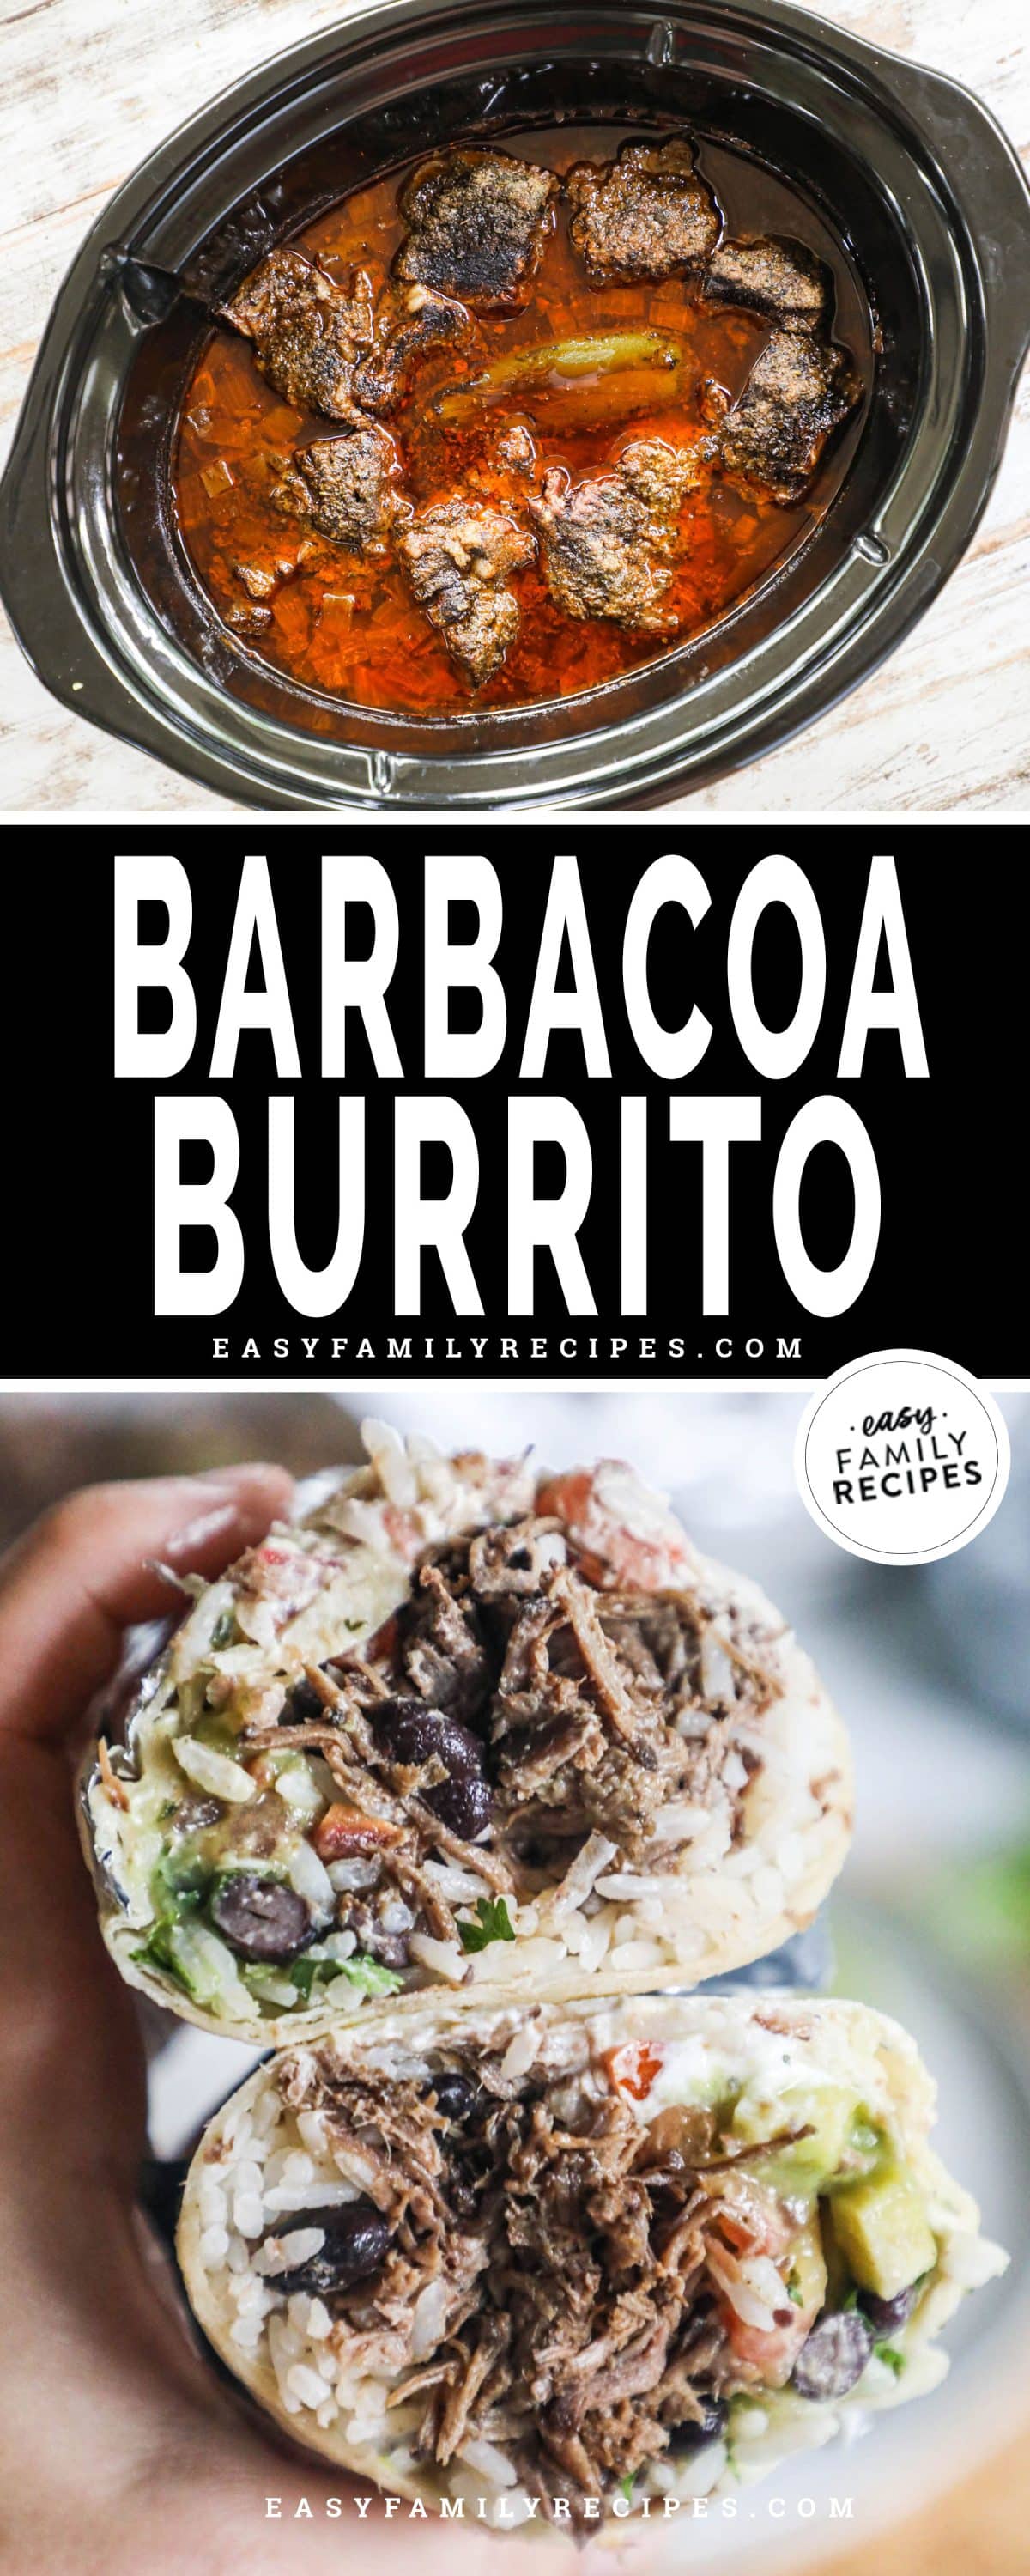 Image collage for barbacoa burritos with one image of beef in a crockpot and another of the completed burrito cut in half to show the fillings.